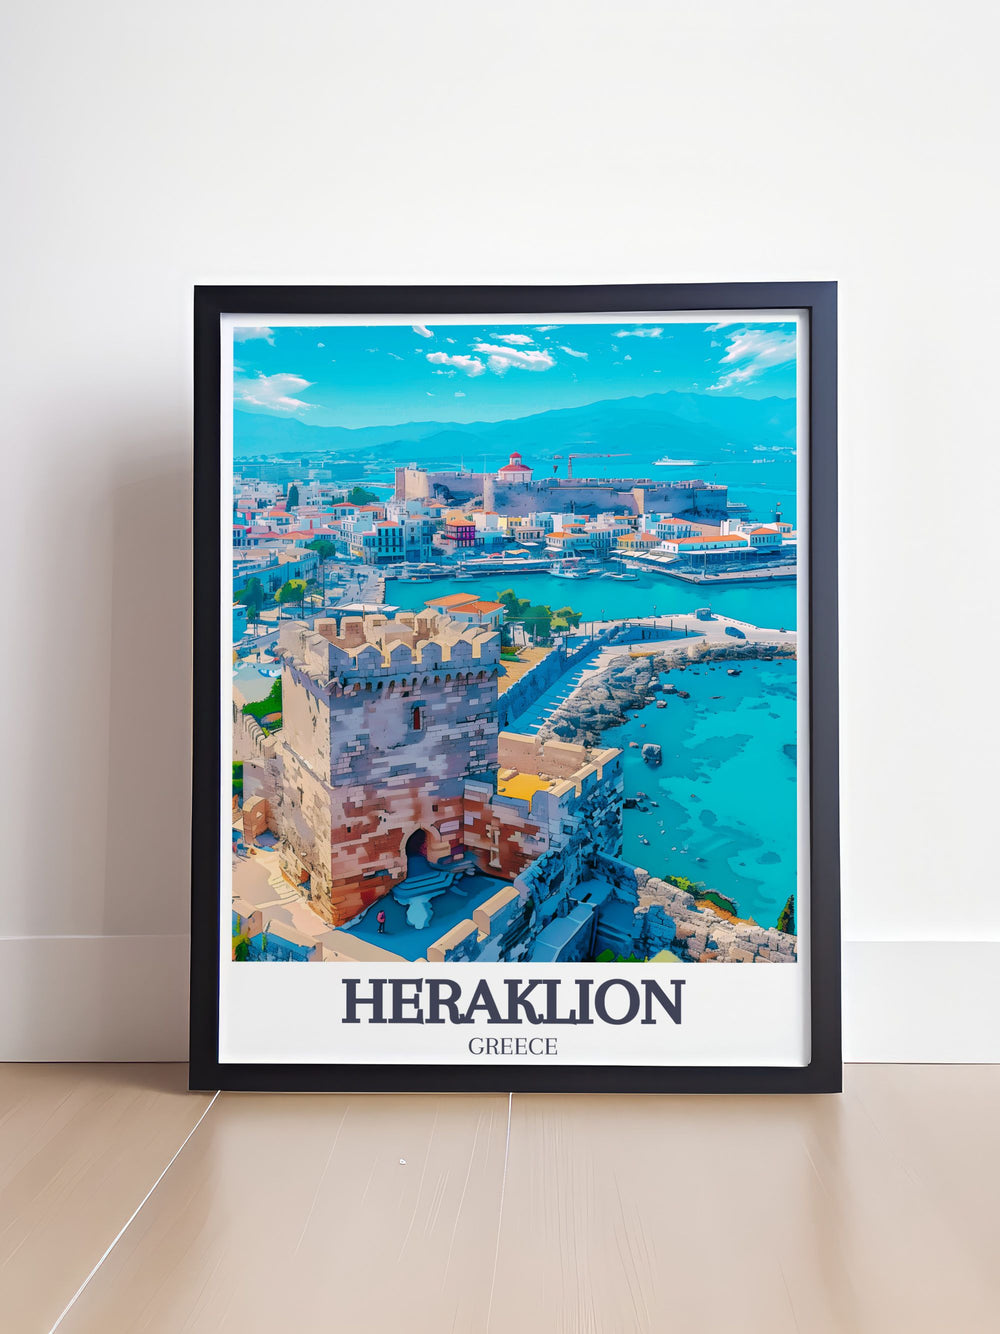 Travel poster of the Old Harbor in Heraklion, Crete, Greece, showcasing its historical significance and vibrant life. The detailed illustration captures the harbors lively atmosphere and architectural charm, making it ideal for any travel enthusiast.